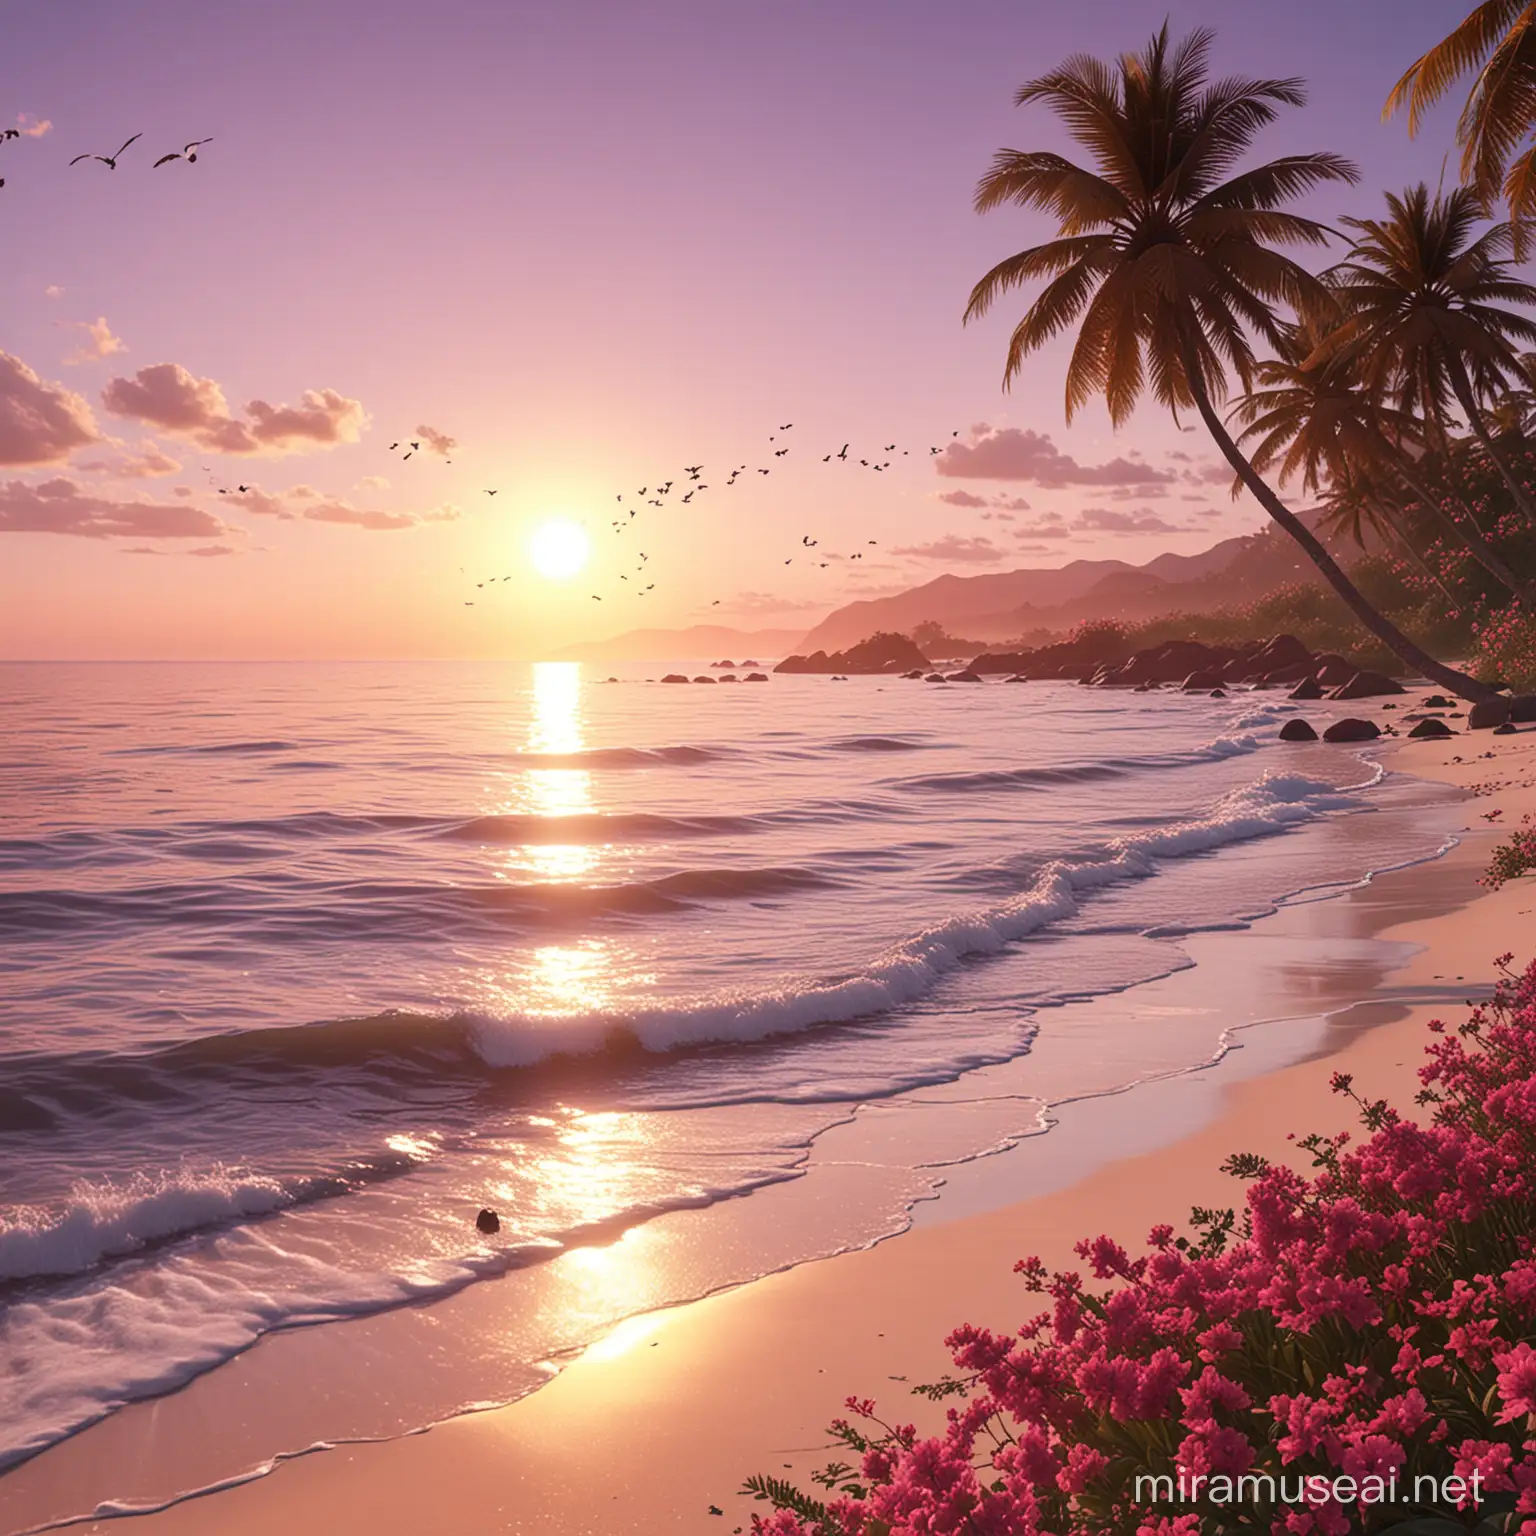 Serene Tropical Beach Sunset Scene with Palm Trees and Calm Ocean Waves